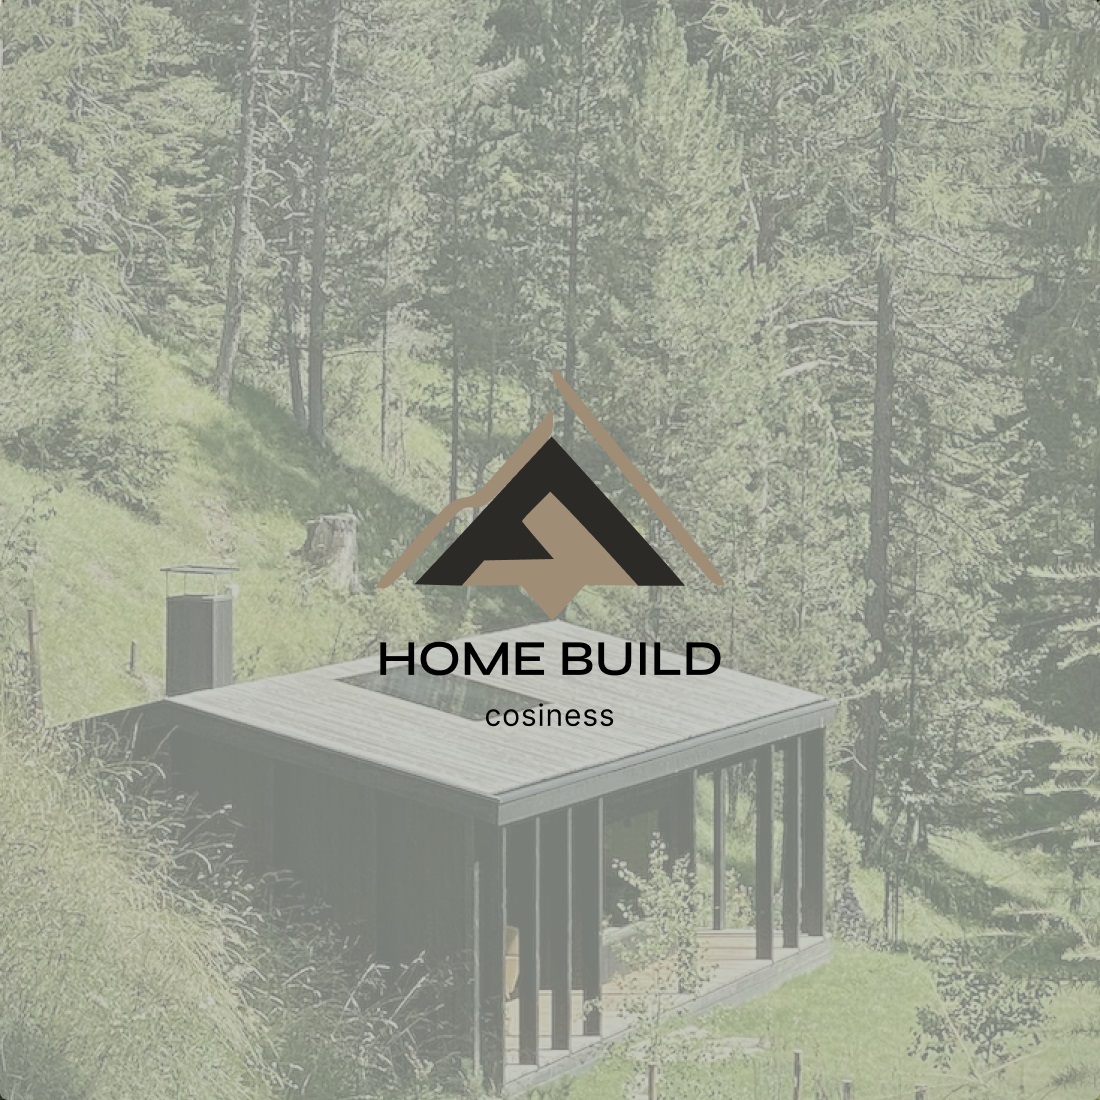 Logo for a construction company Home Build preview image.